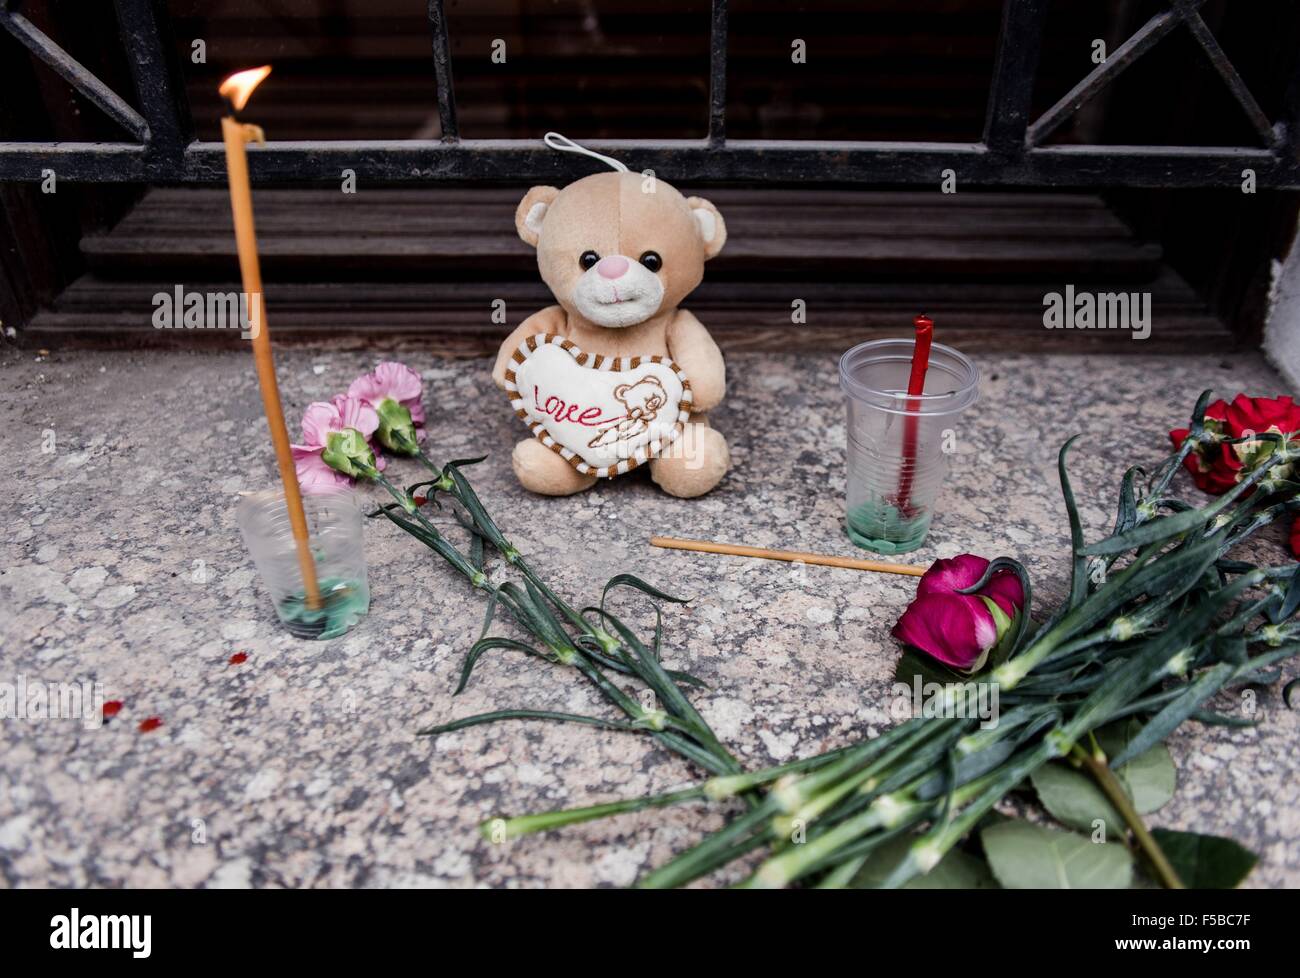 Moscow. 1st Nov, 2015. A stuffed bear, together with candles and flowers, is placed outside a window at the Administration of St. Petersburg in Moscow, Nov. 1, 2015, to mourn the victims aboard the Russian plane that crashed Saturday in Egypt's Sinai. Credit:  Evgeny Sinitsyn/Xinhua/Alamy Live News Stock Photo